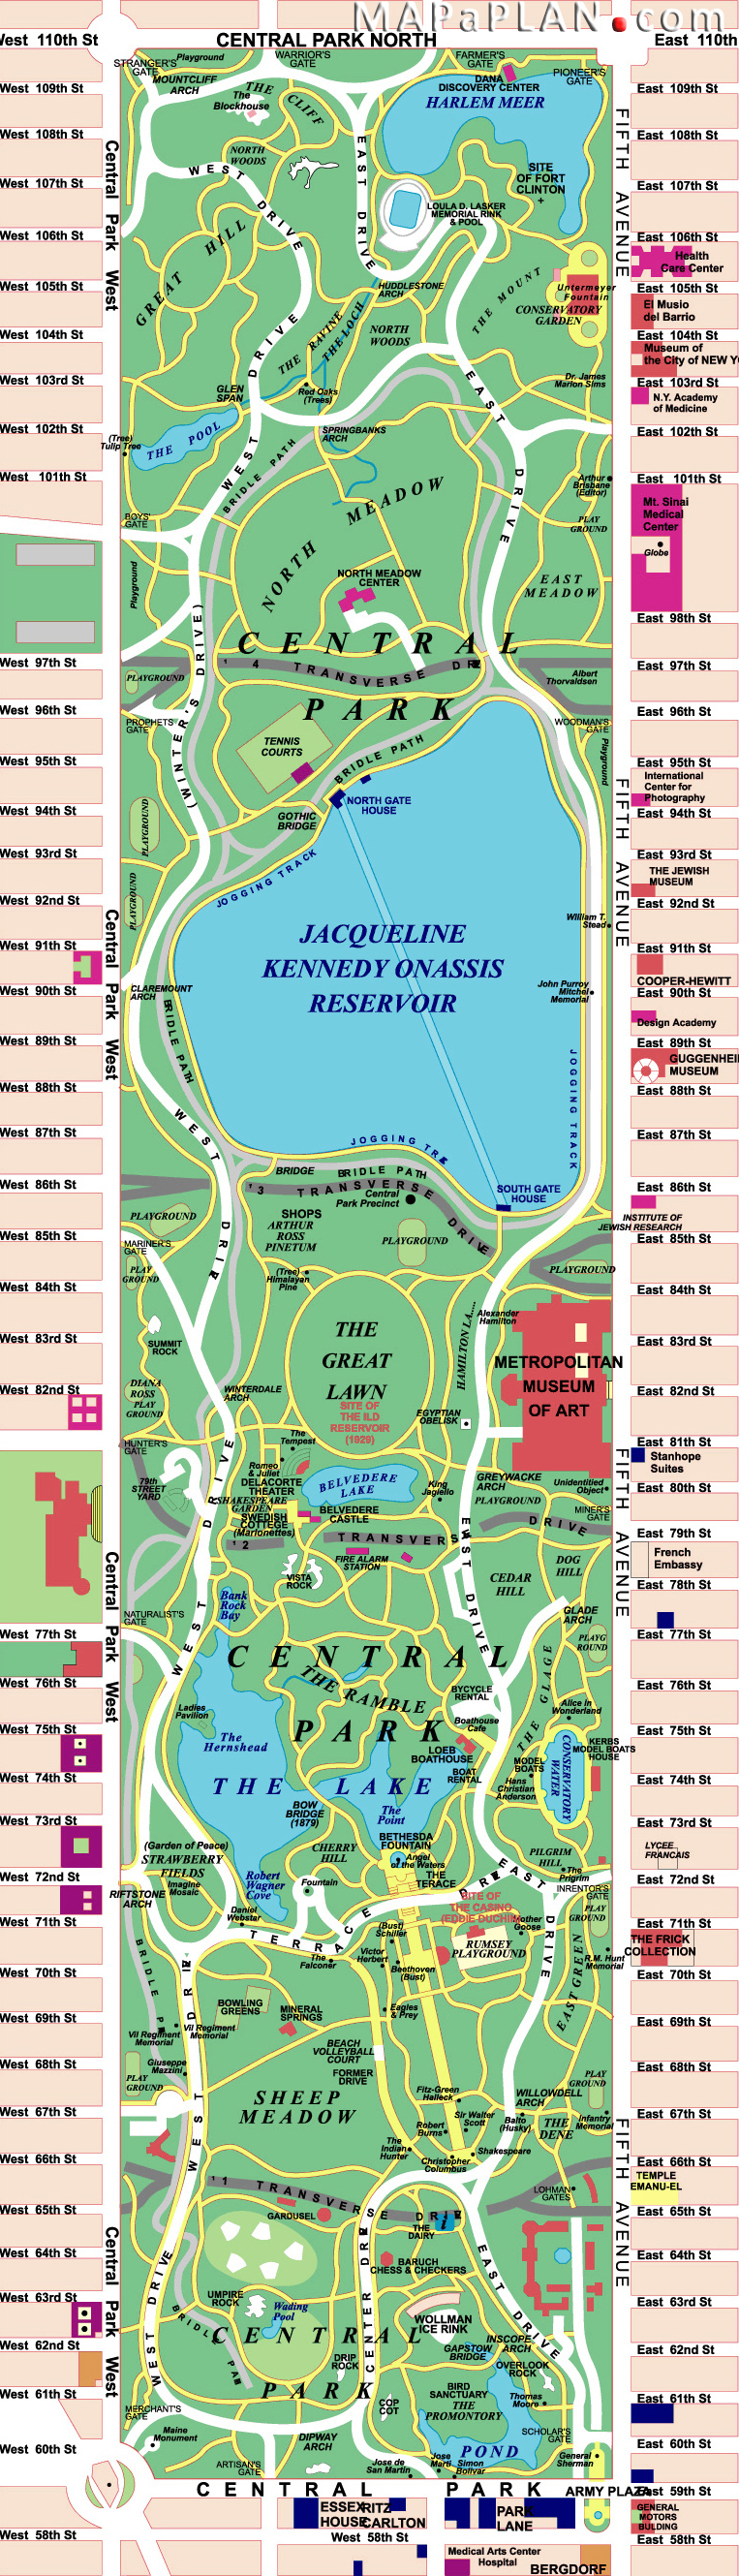 central-park-favourite-and-free-destination-spots-new-york-top-tourist-attractions-map